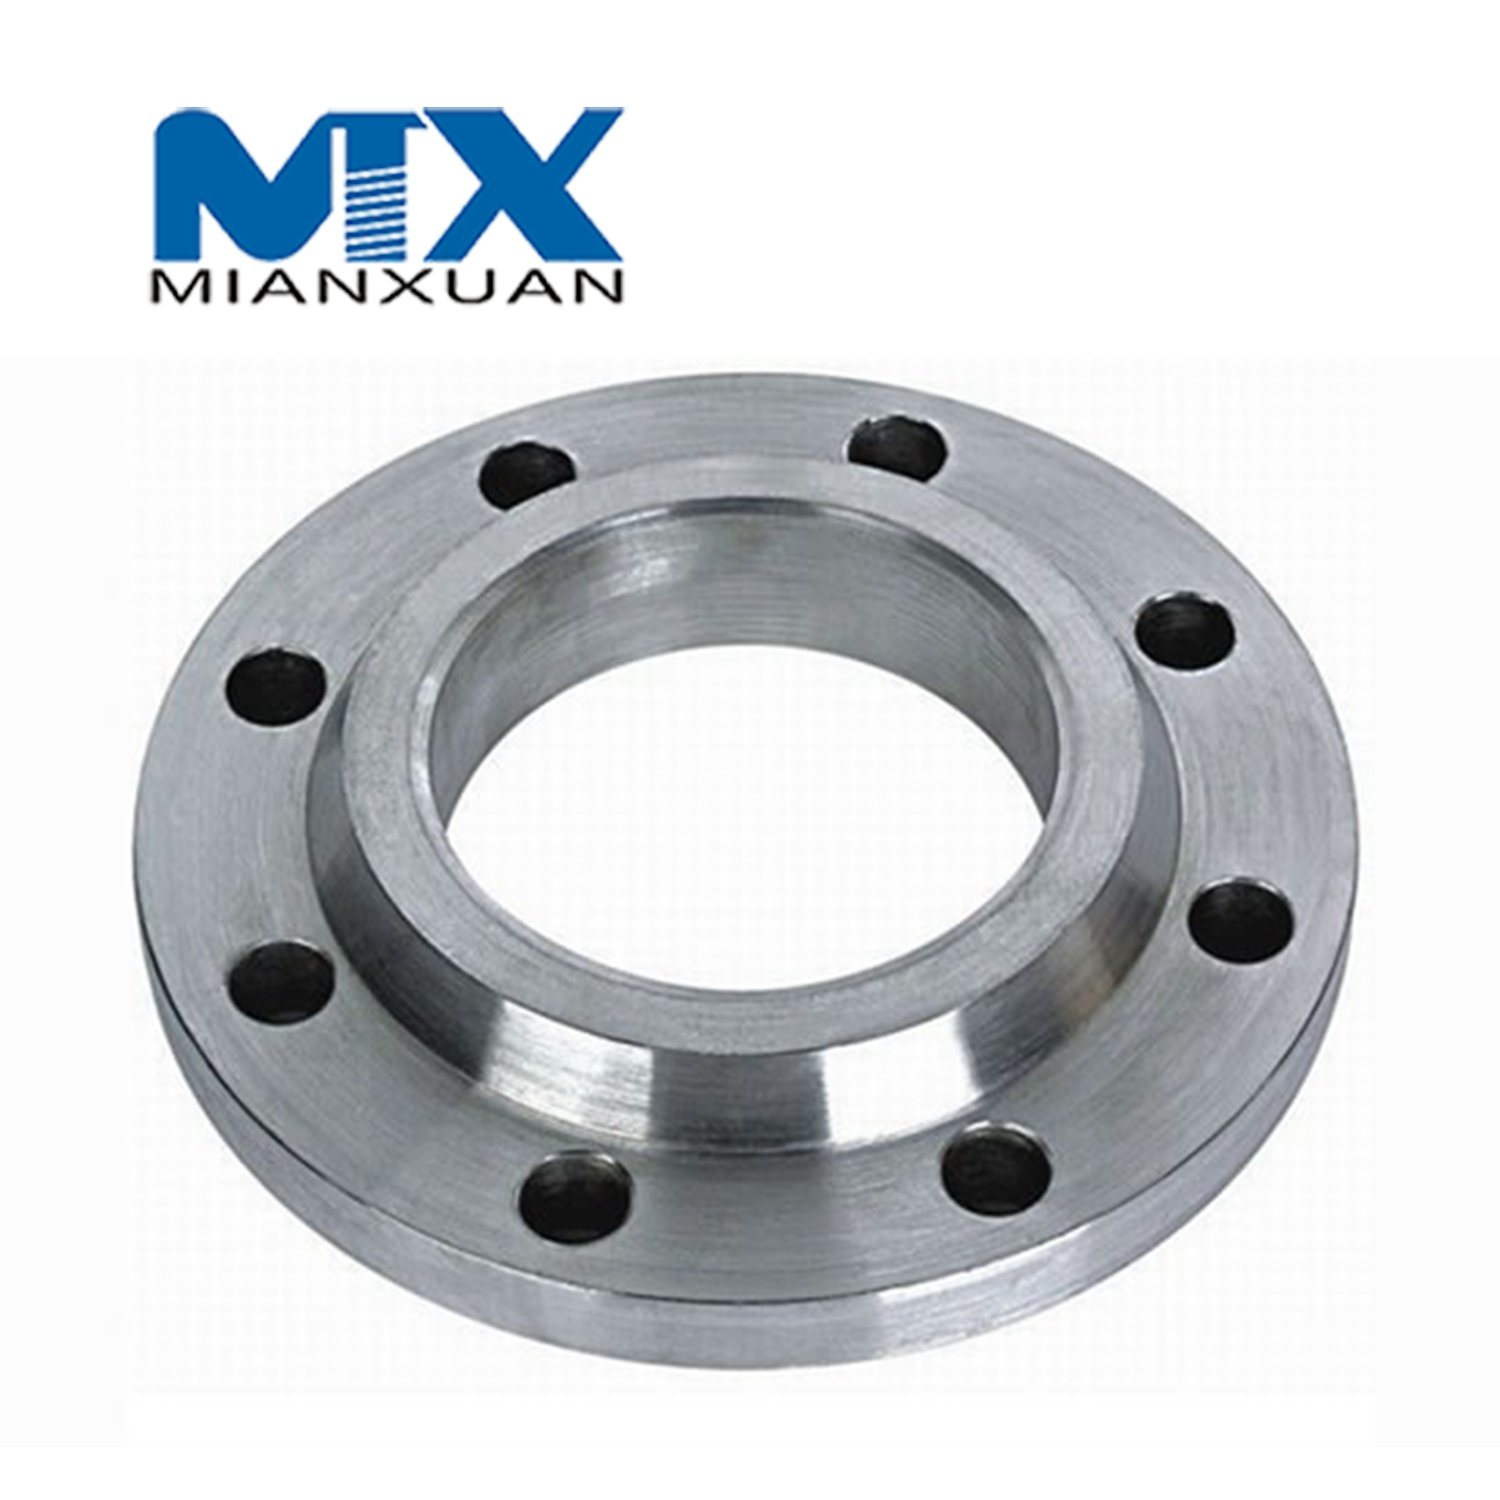 OEM Hot Forging Flange with CNC Flange for Machinery